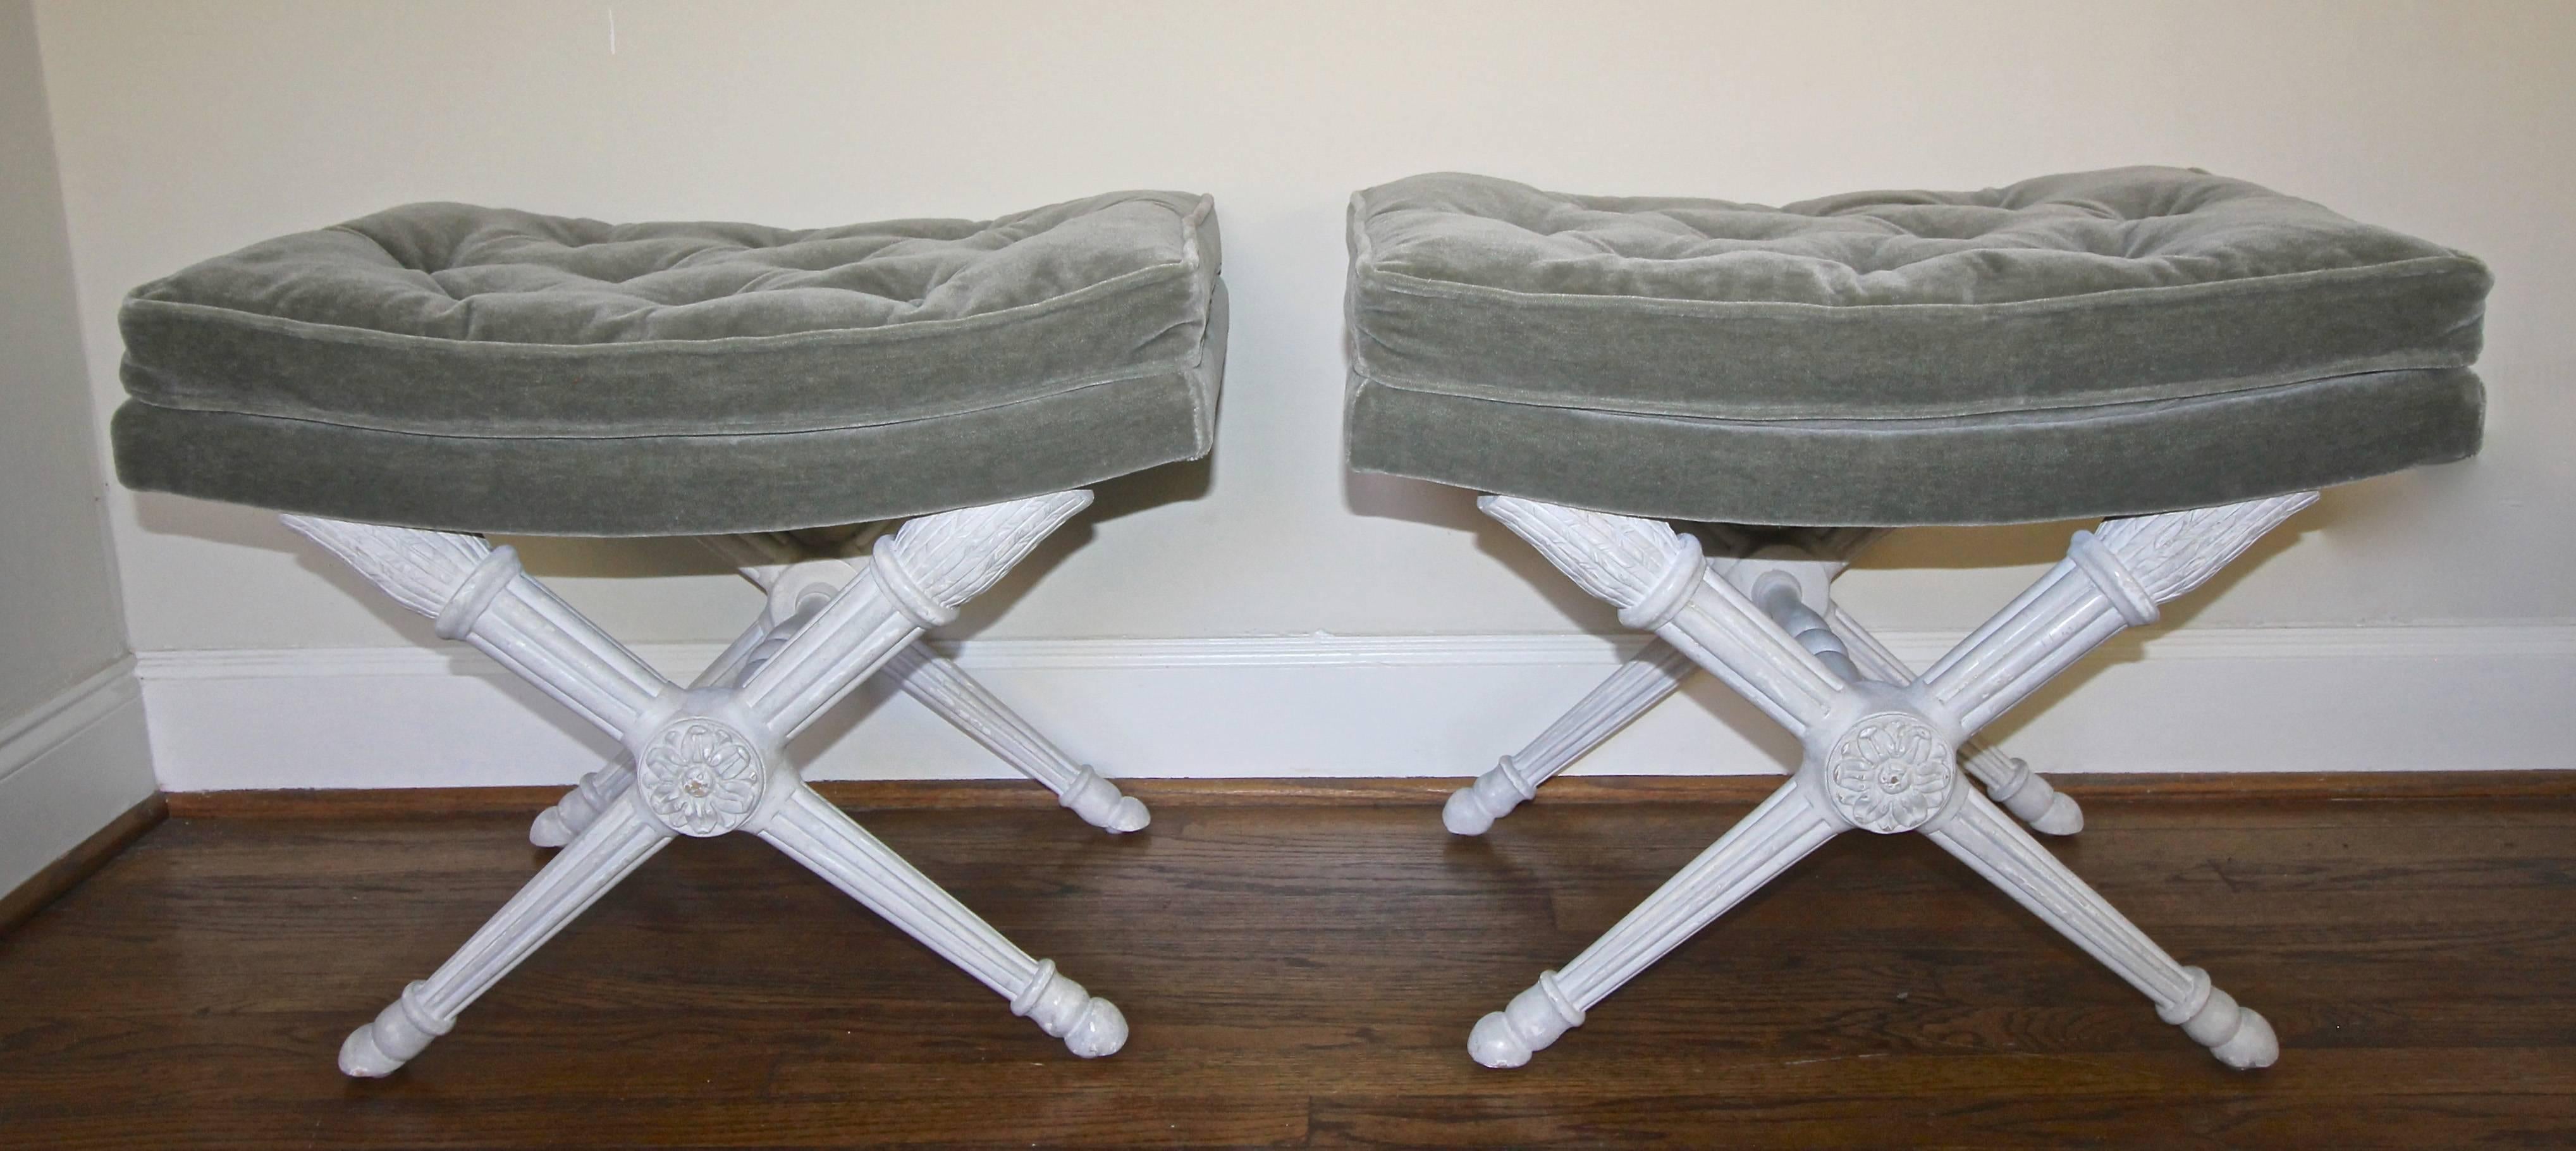 Pair of 1950s French Directoire style carved wood white antiqued finish benches with X-stretcher bases. Newly covered with slate green mohair fabric. The handsome pair fits most decor including modern and traditional.